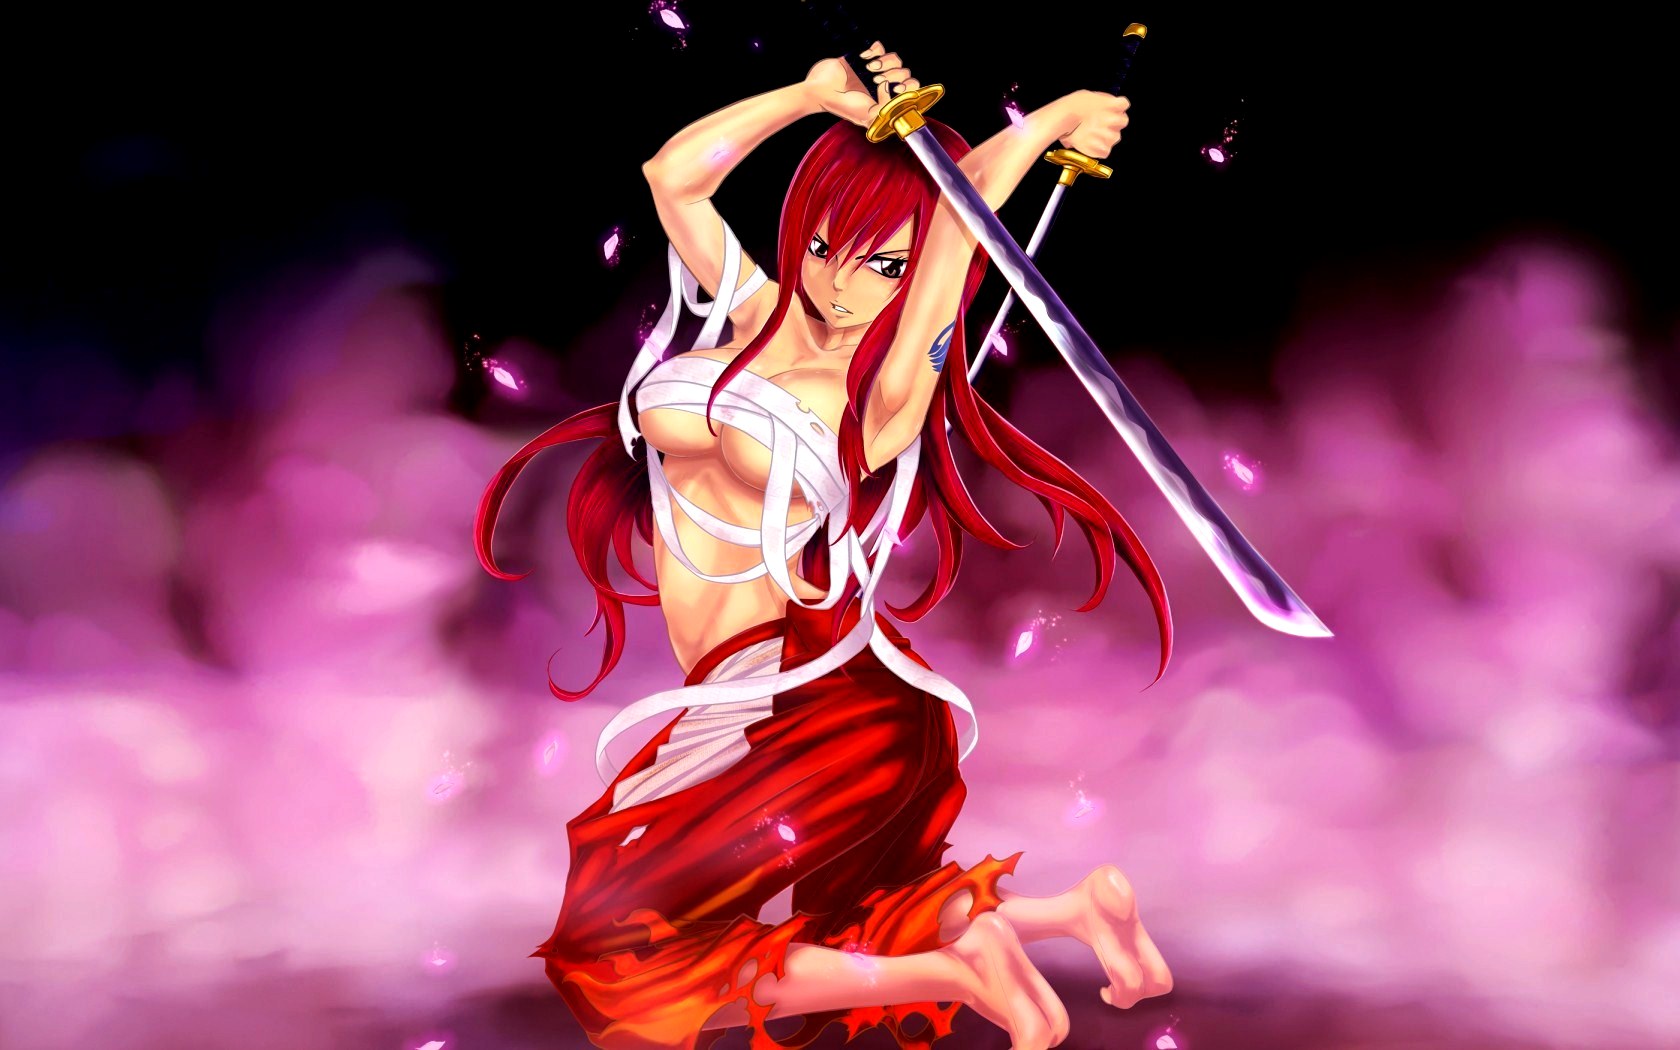 Fairy Tail Erza Scarlet Single Hd Wallpaper high quality